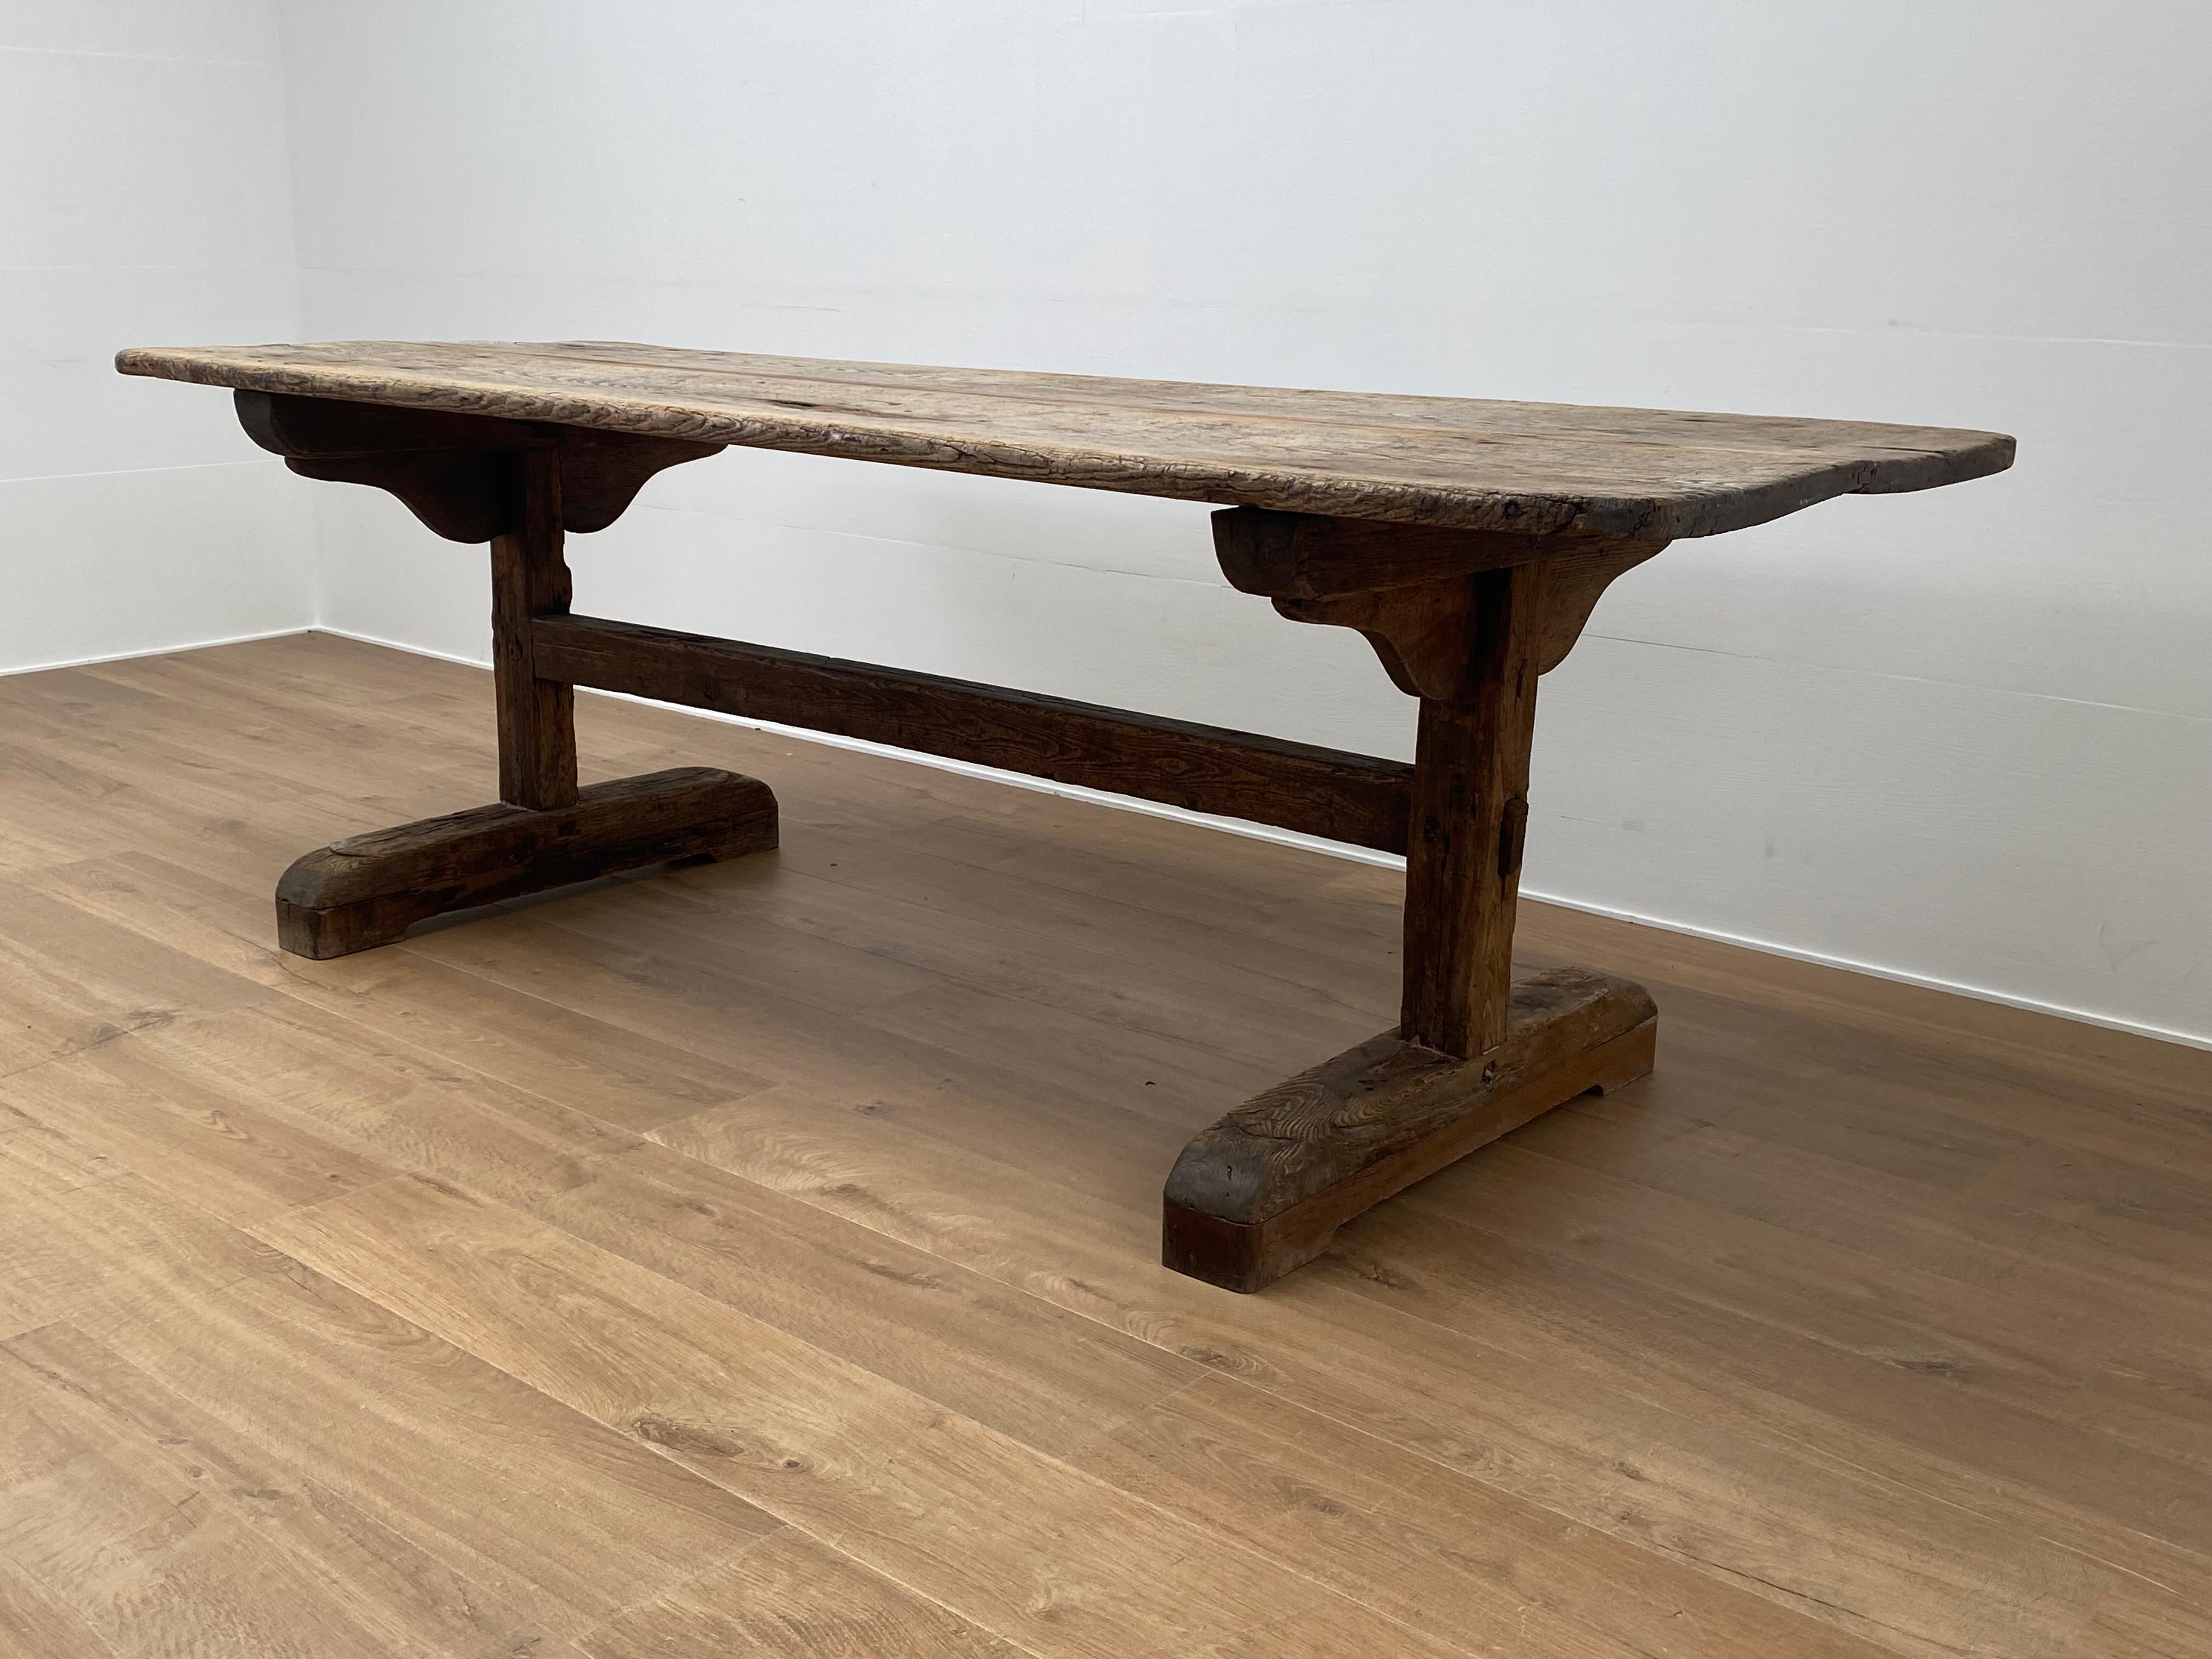 Antique, Brutalist French Farm Table In Good Condition For Sale In Schellebelle, BE